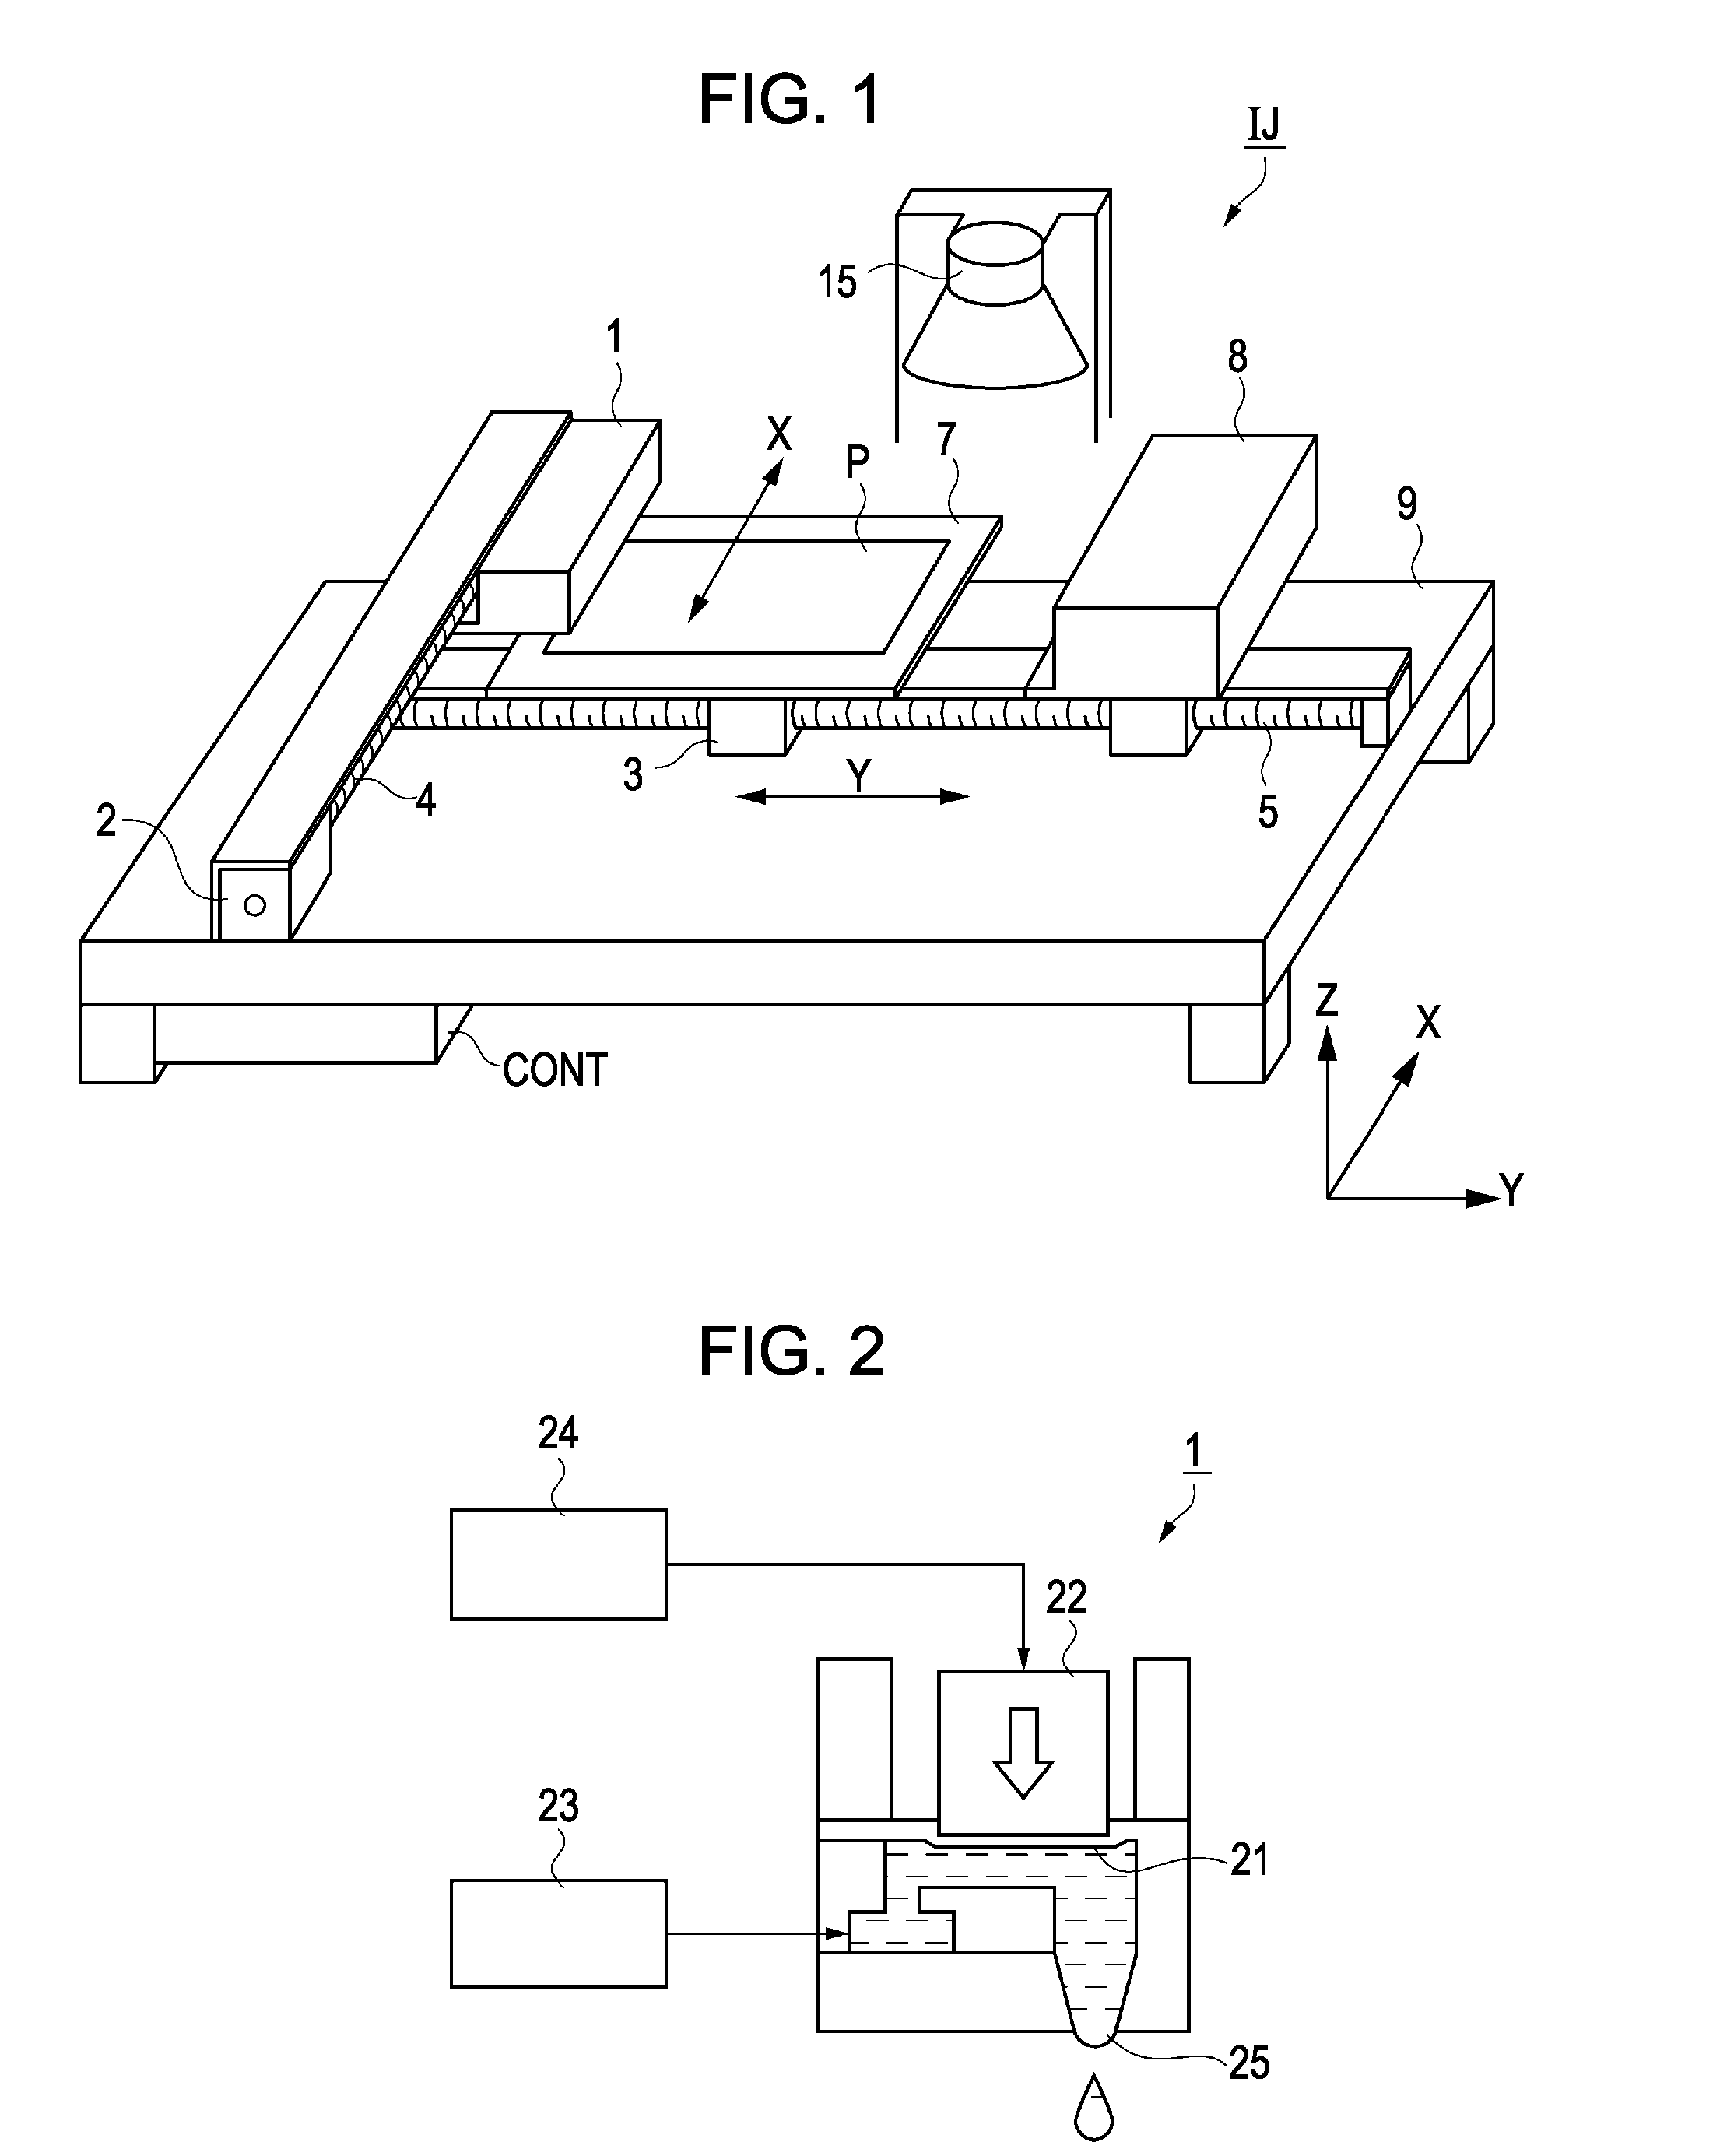 Bank structure, wiring pattern forming method, device, electro-optical device, and electronic apparatus